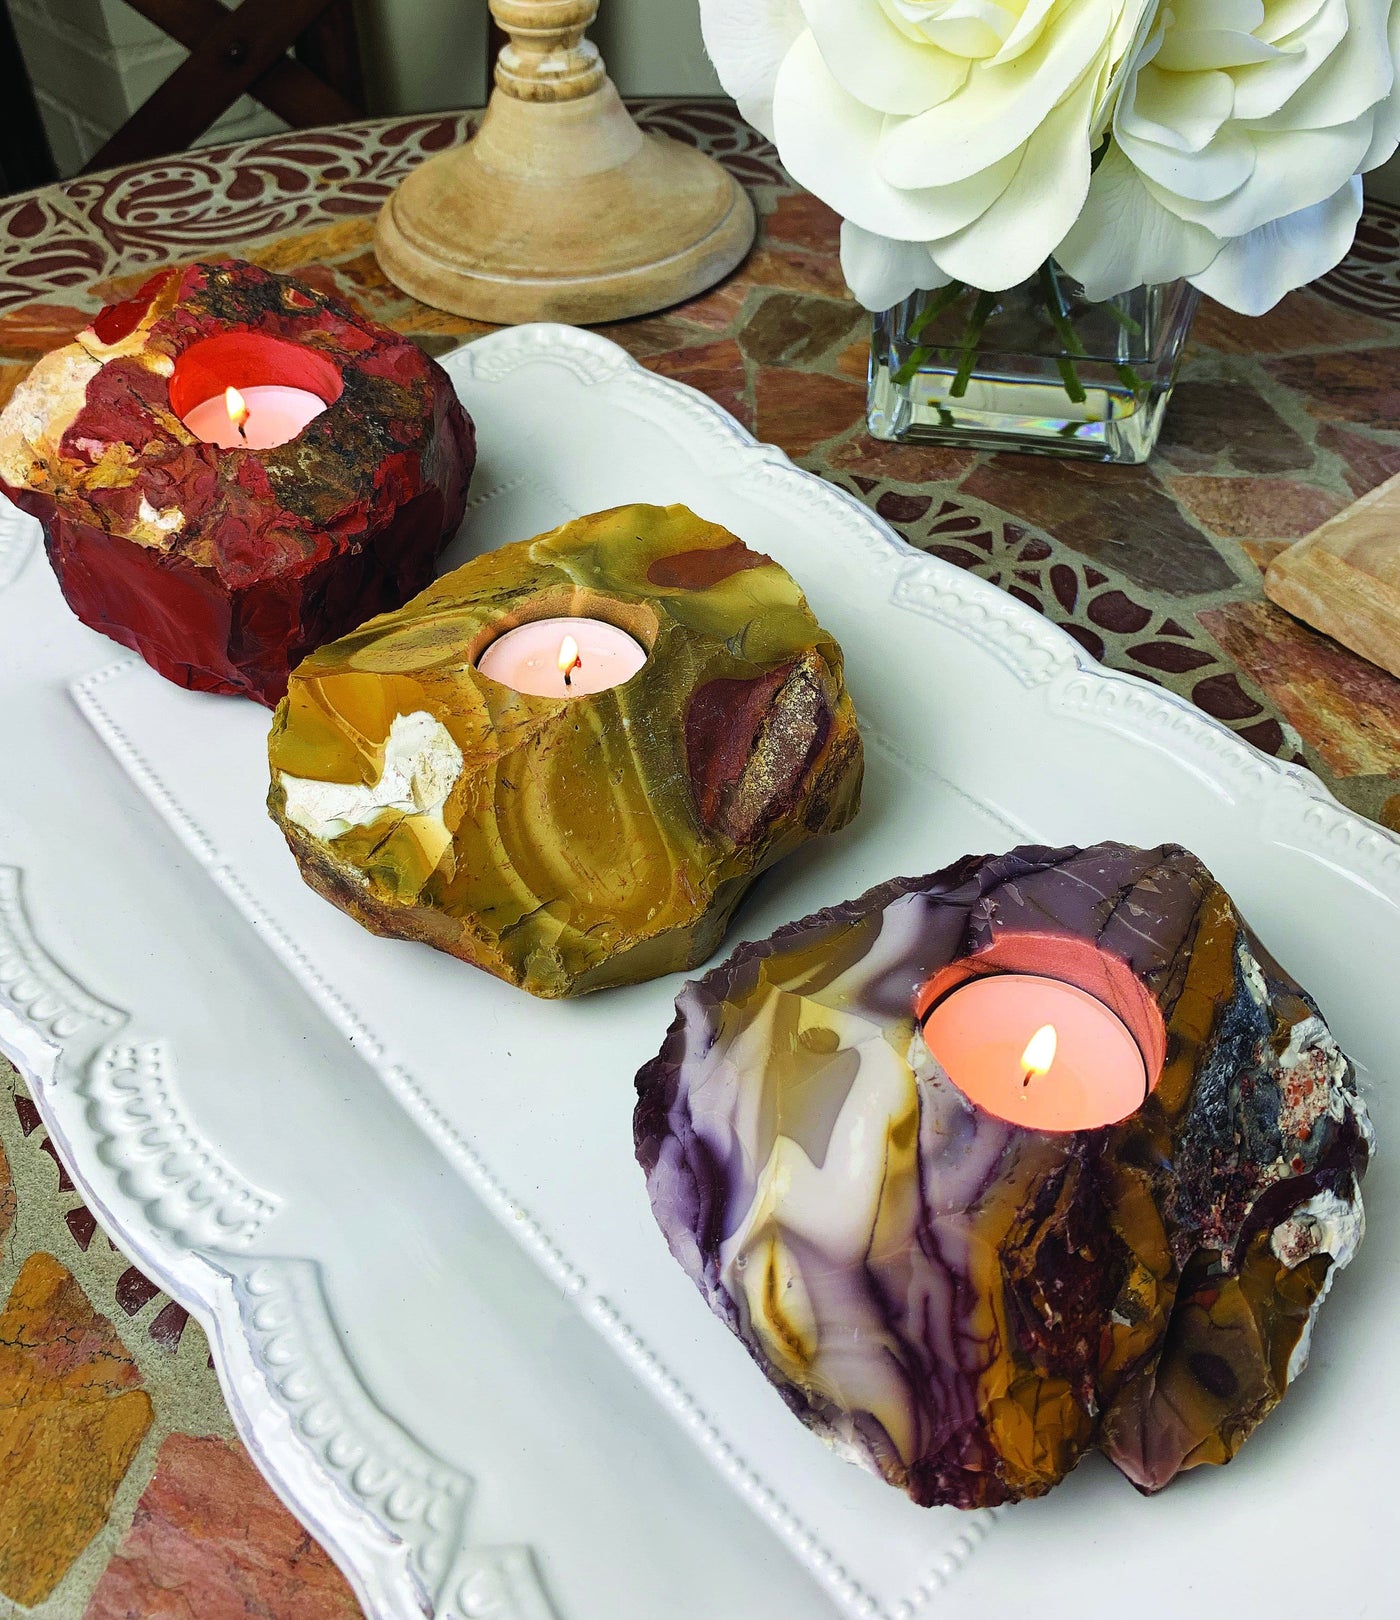 3 mookaite candle holders with candles burning in them all on a white platter